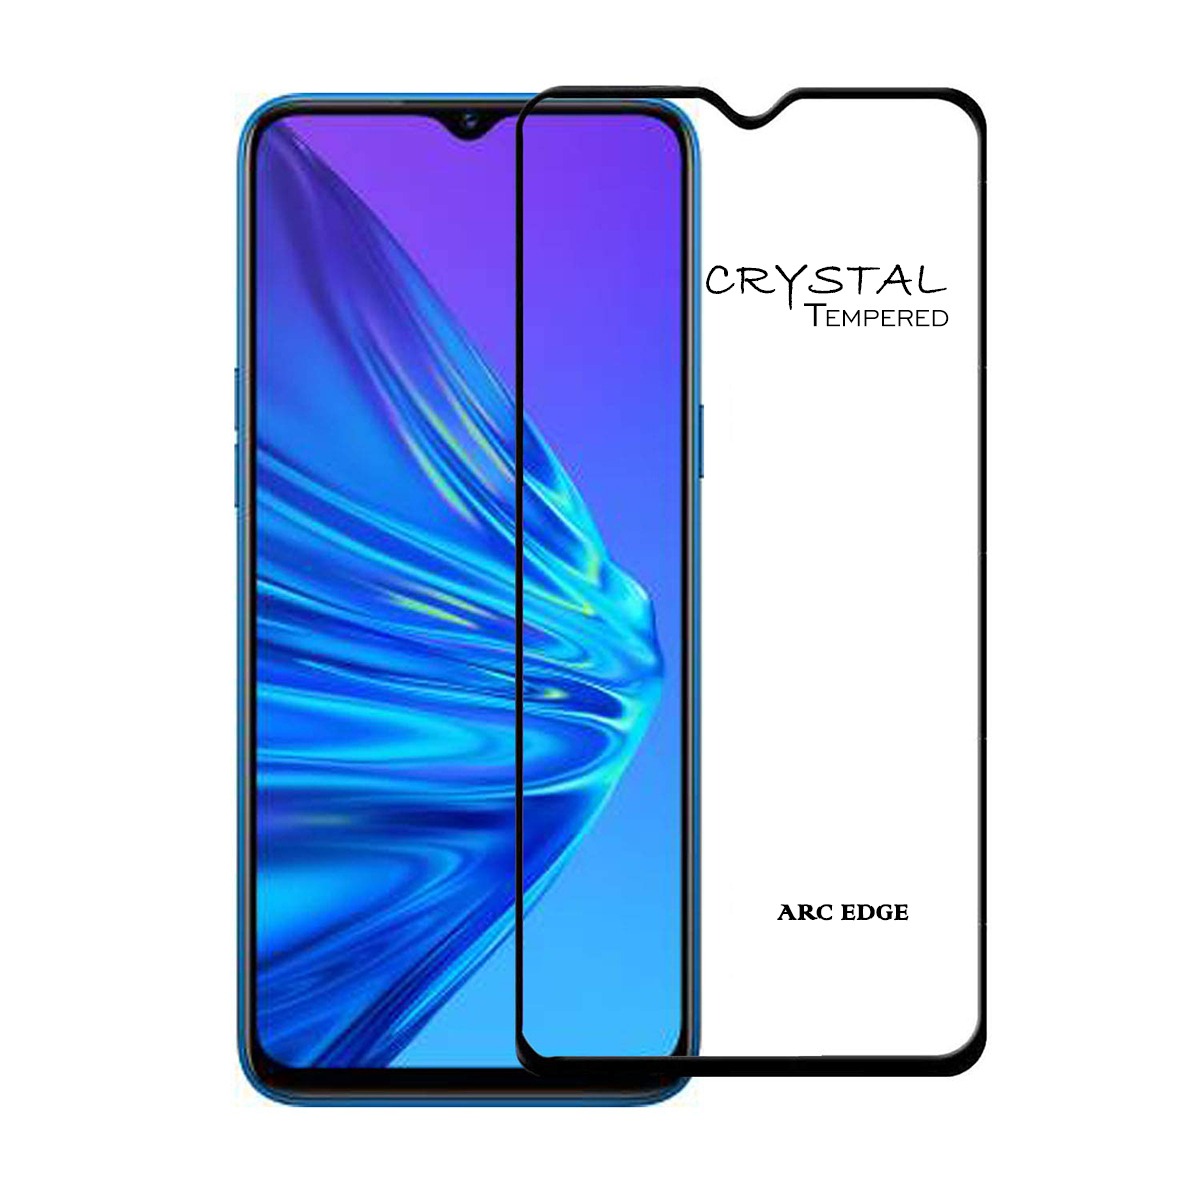 iFix Crystal 5D Tempered Glass for OPPO REALME 5/5i/5S/6i/7i Global/9i 5G